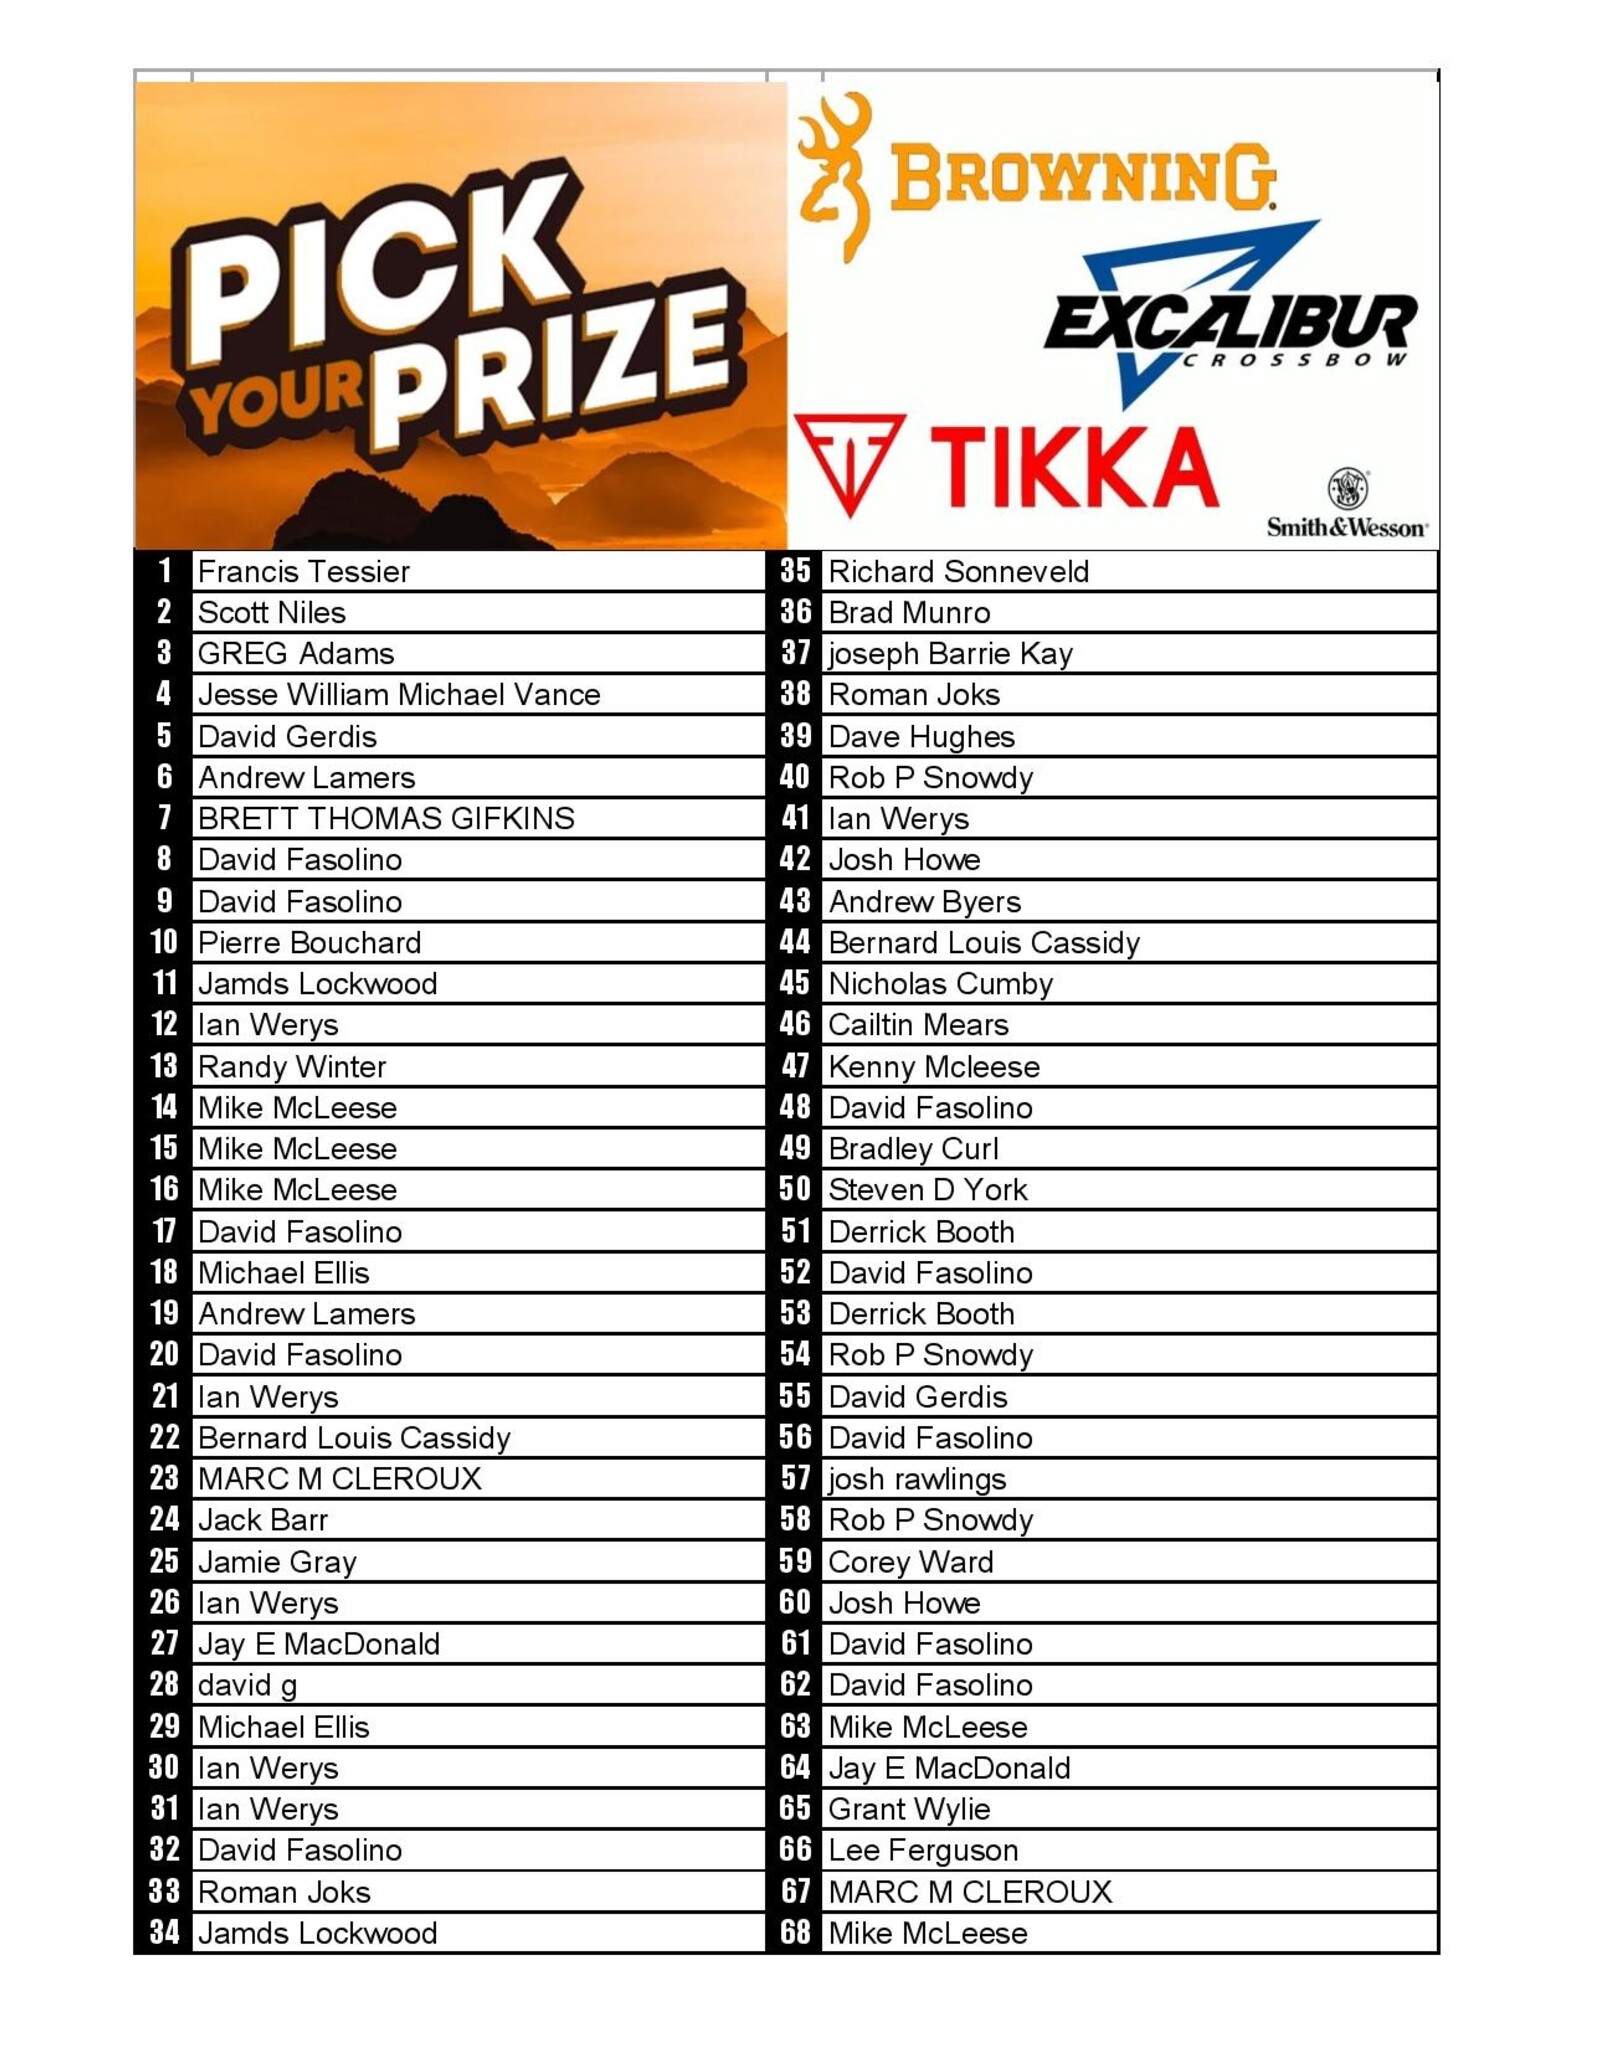 DRAW #1318 -Pick Your Prize - Browning OR Excalibur & Tikka +Smith&Wesson